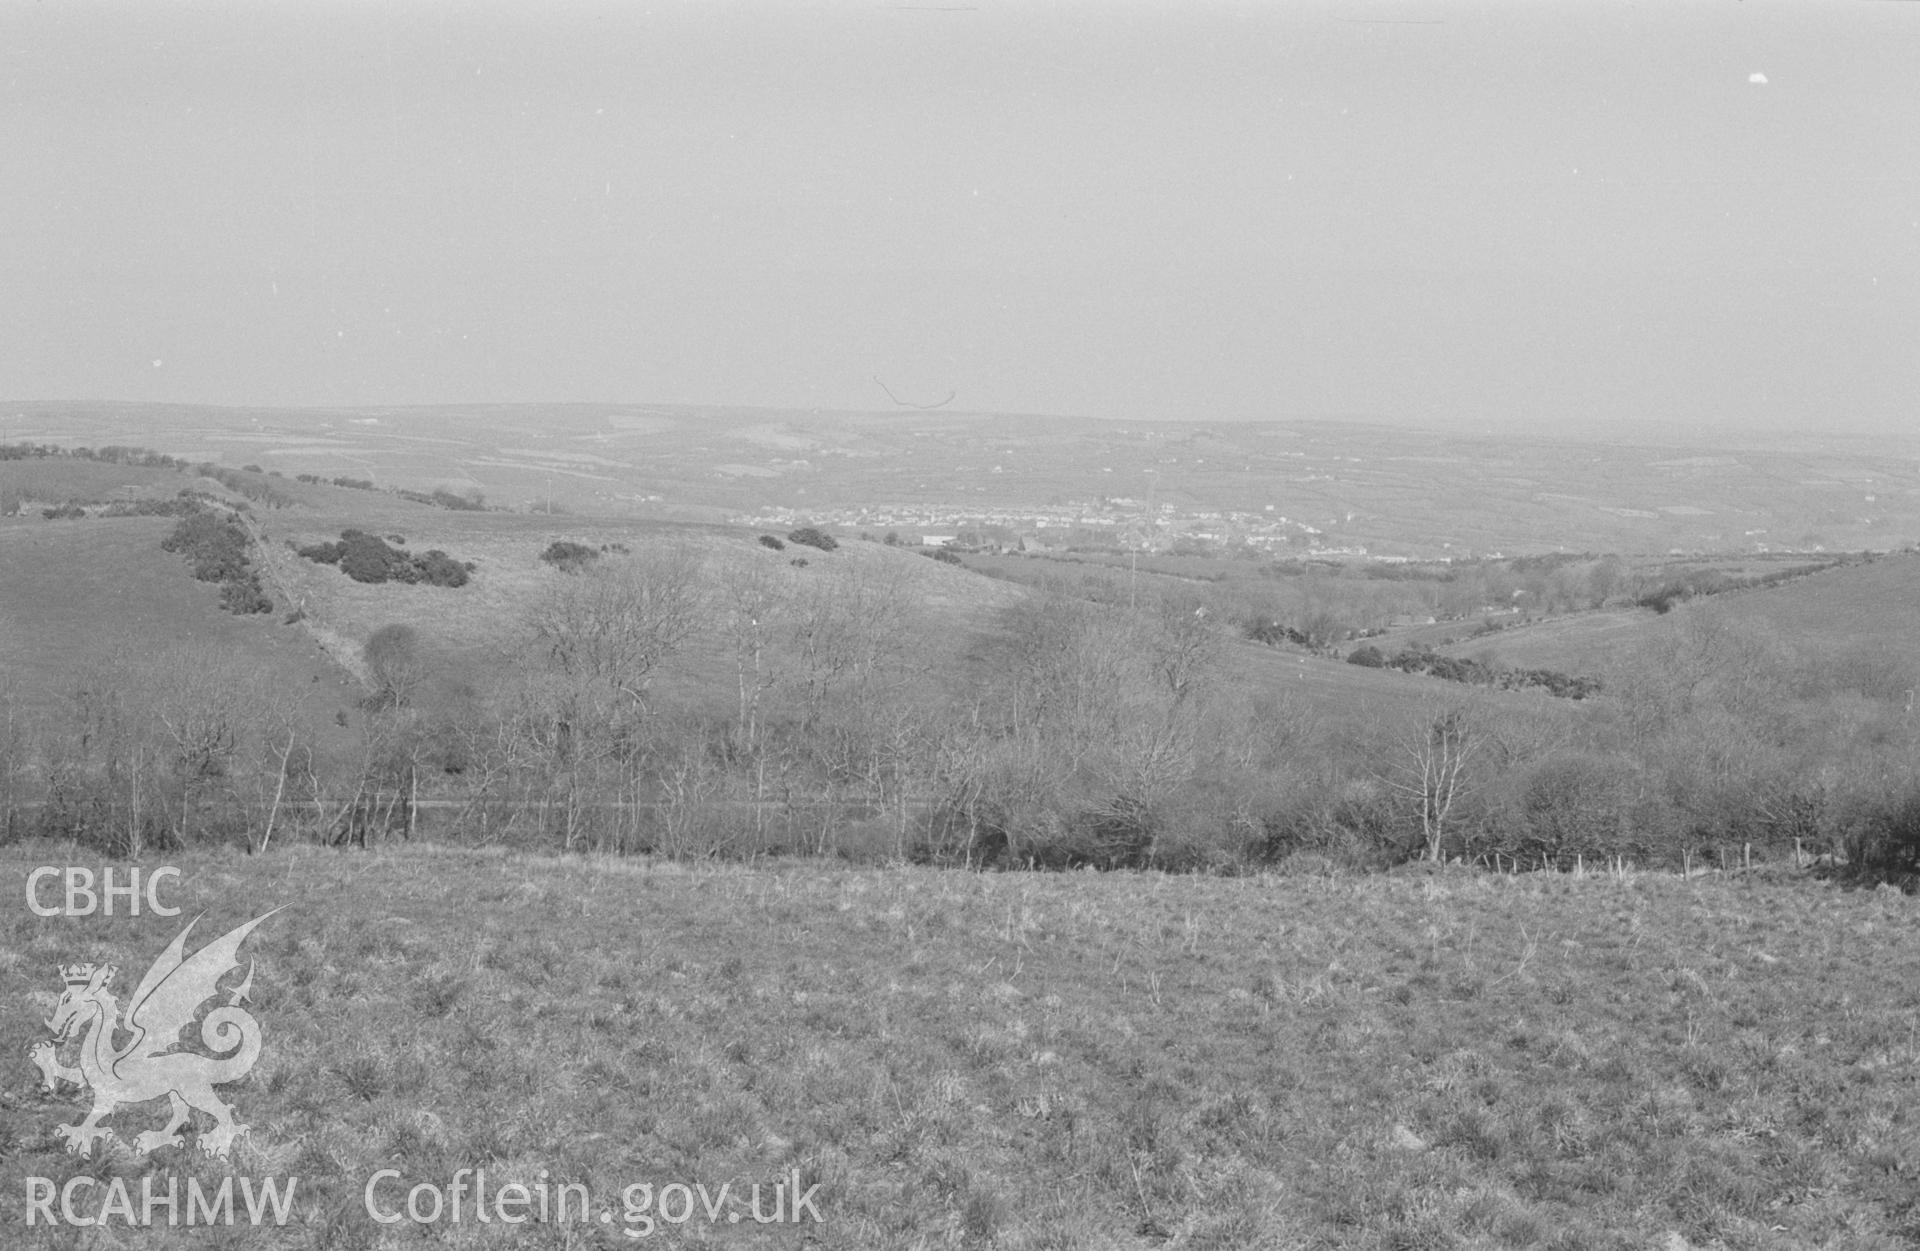 Digital copy of a black and white negative showing distant view of Cardigan. Photographed by Arthur O. Chater in April 1968.